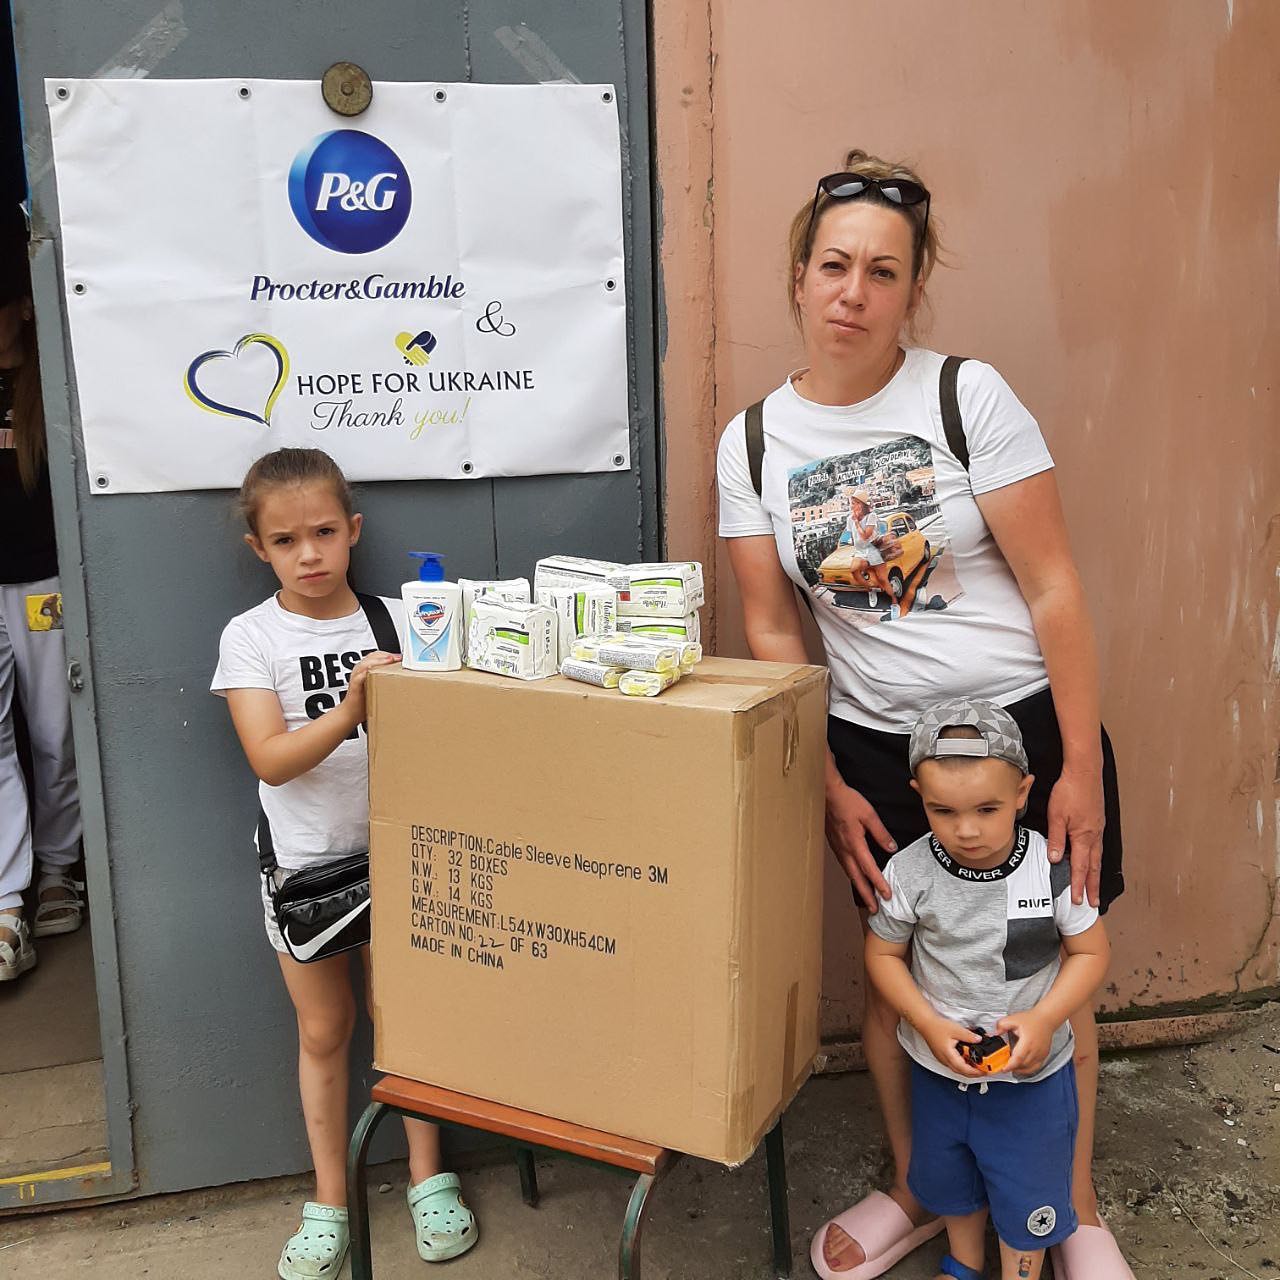 a woman and two children standing next to a cardboard box.